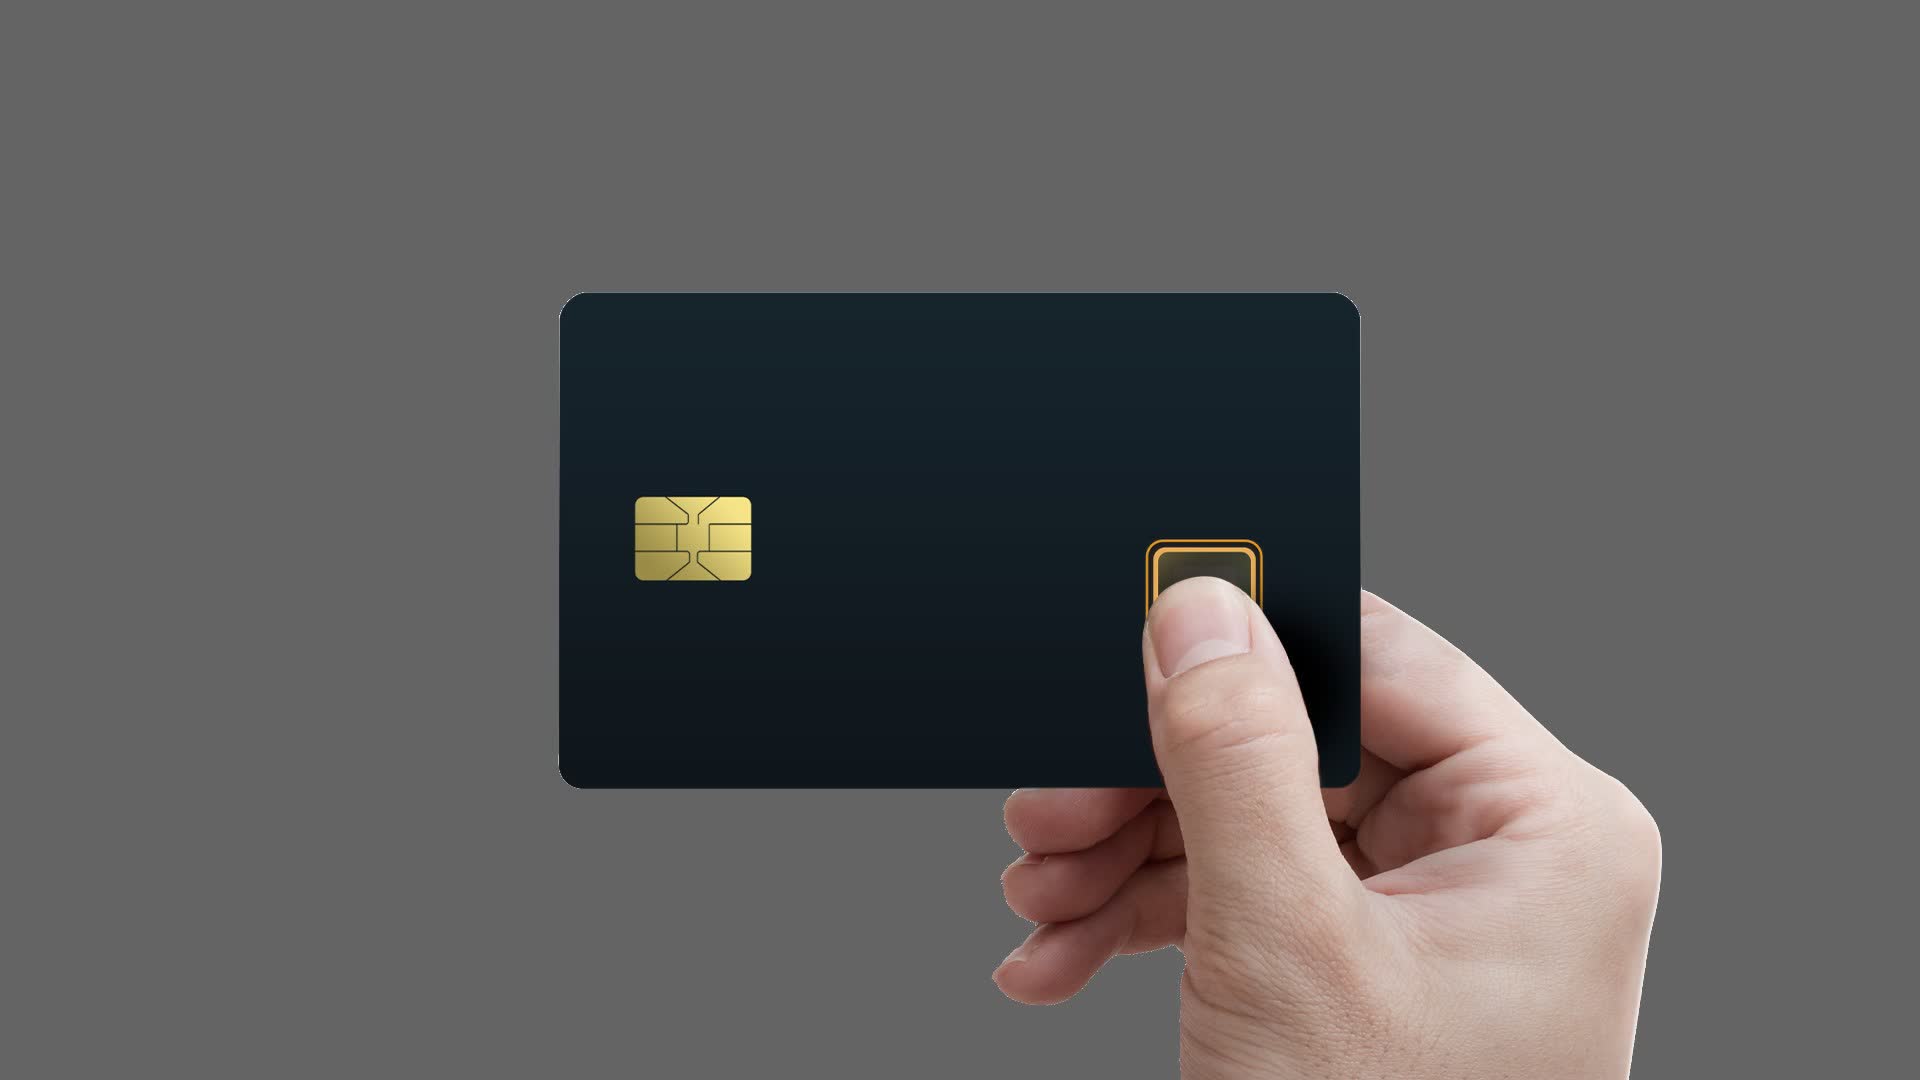 Samsung combines security IC with biometrics in new payment card solution